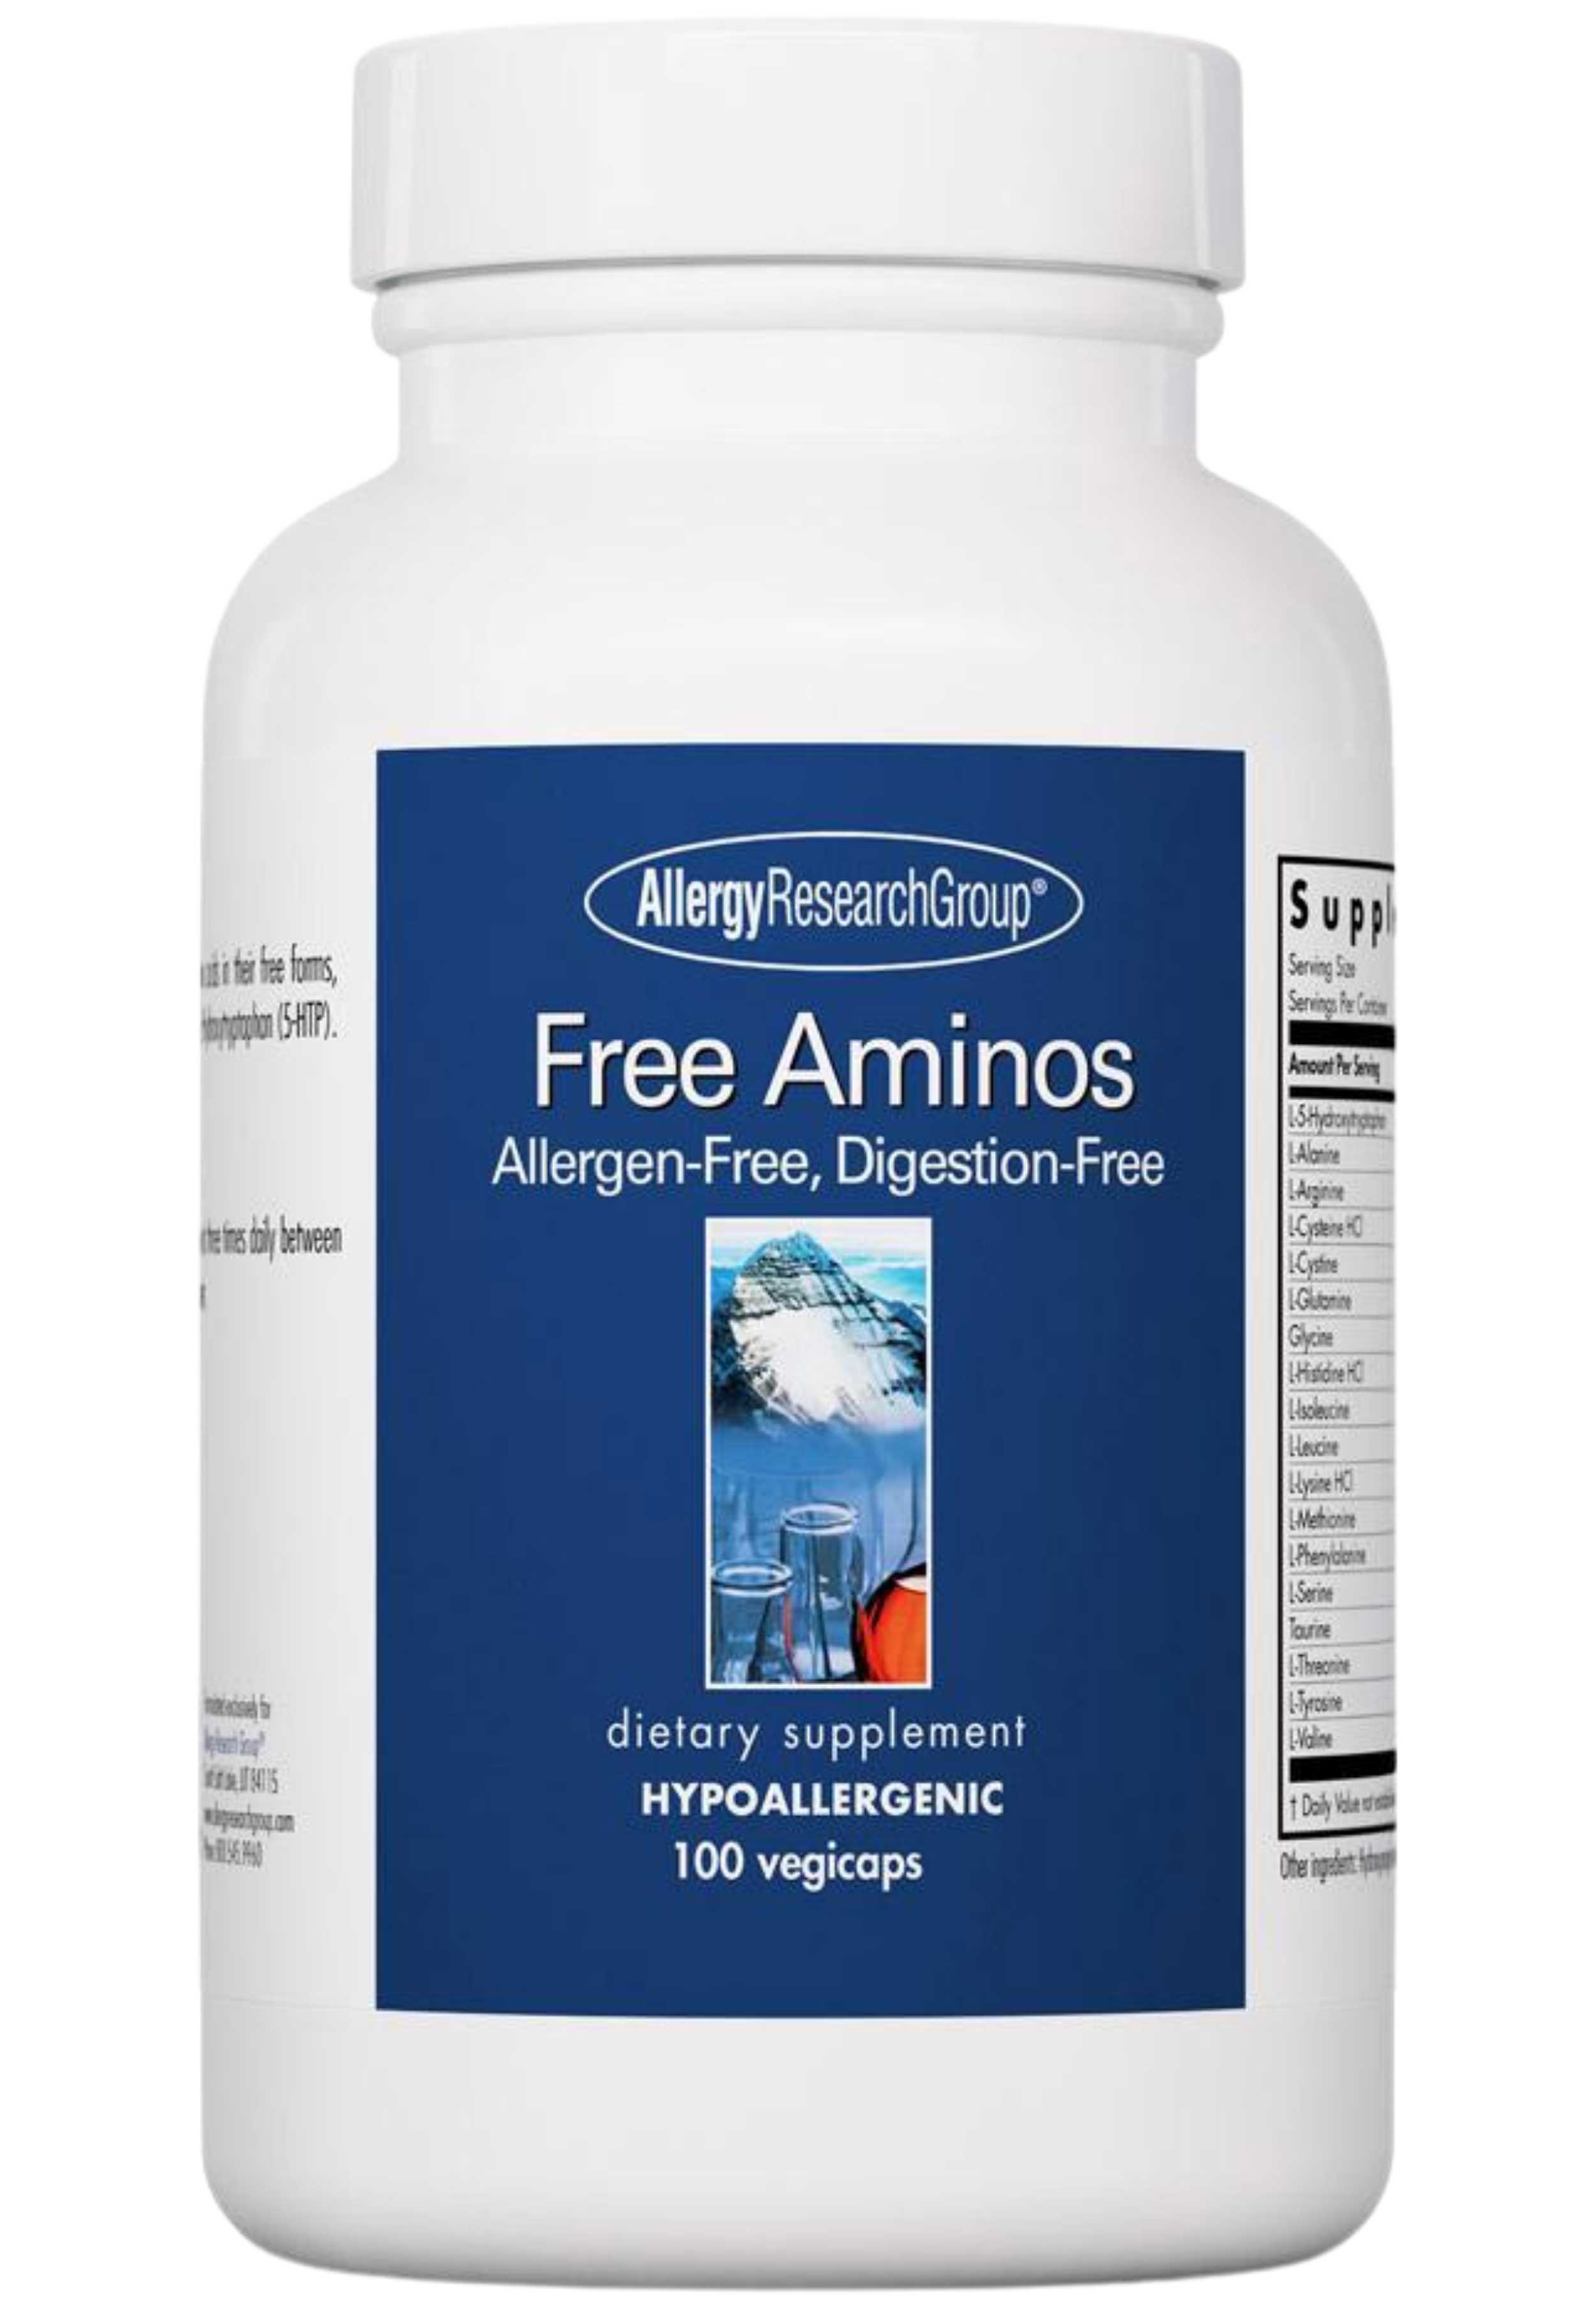 Allergy Research Group Free Aminos